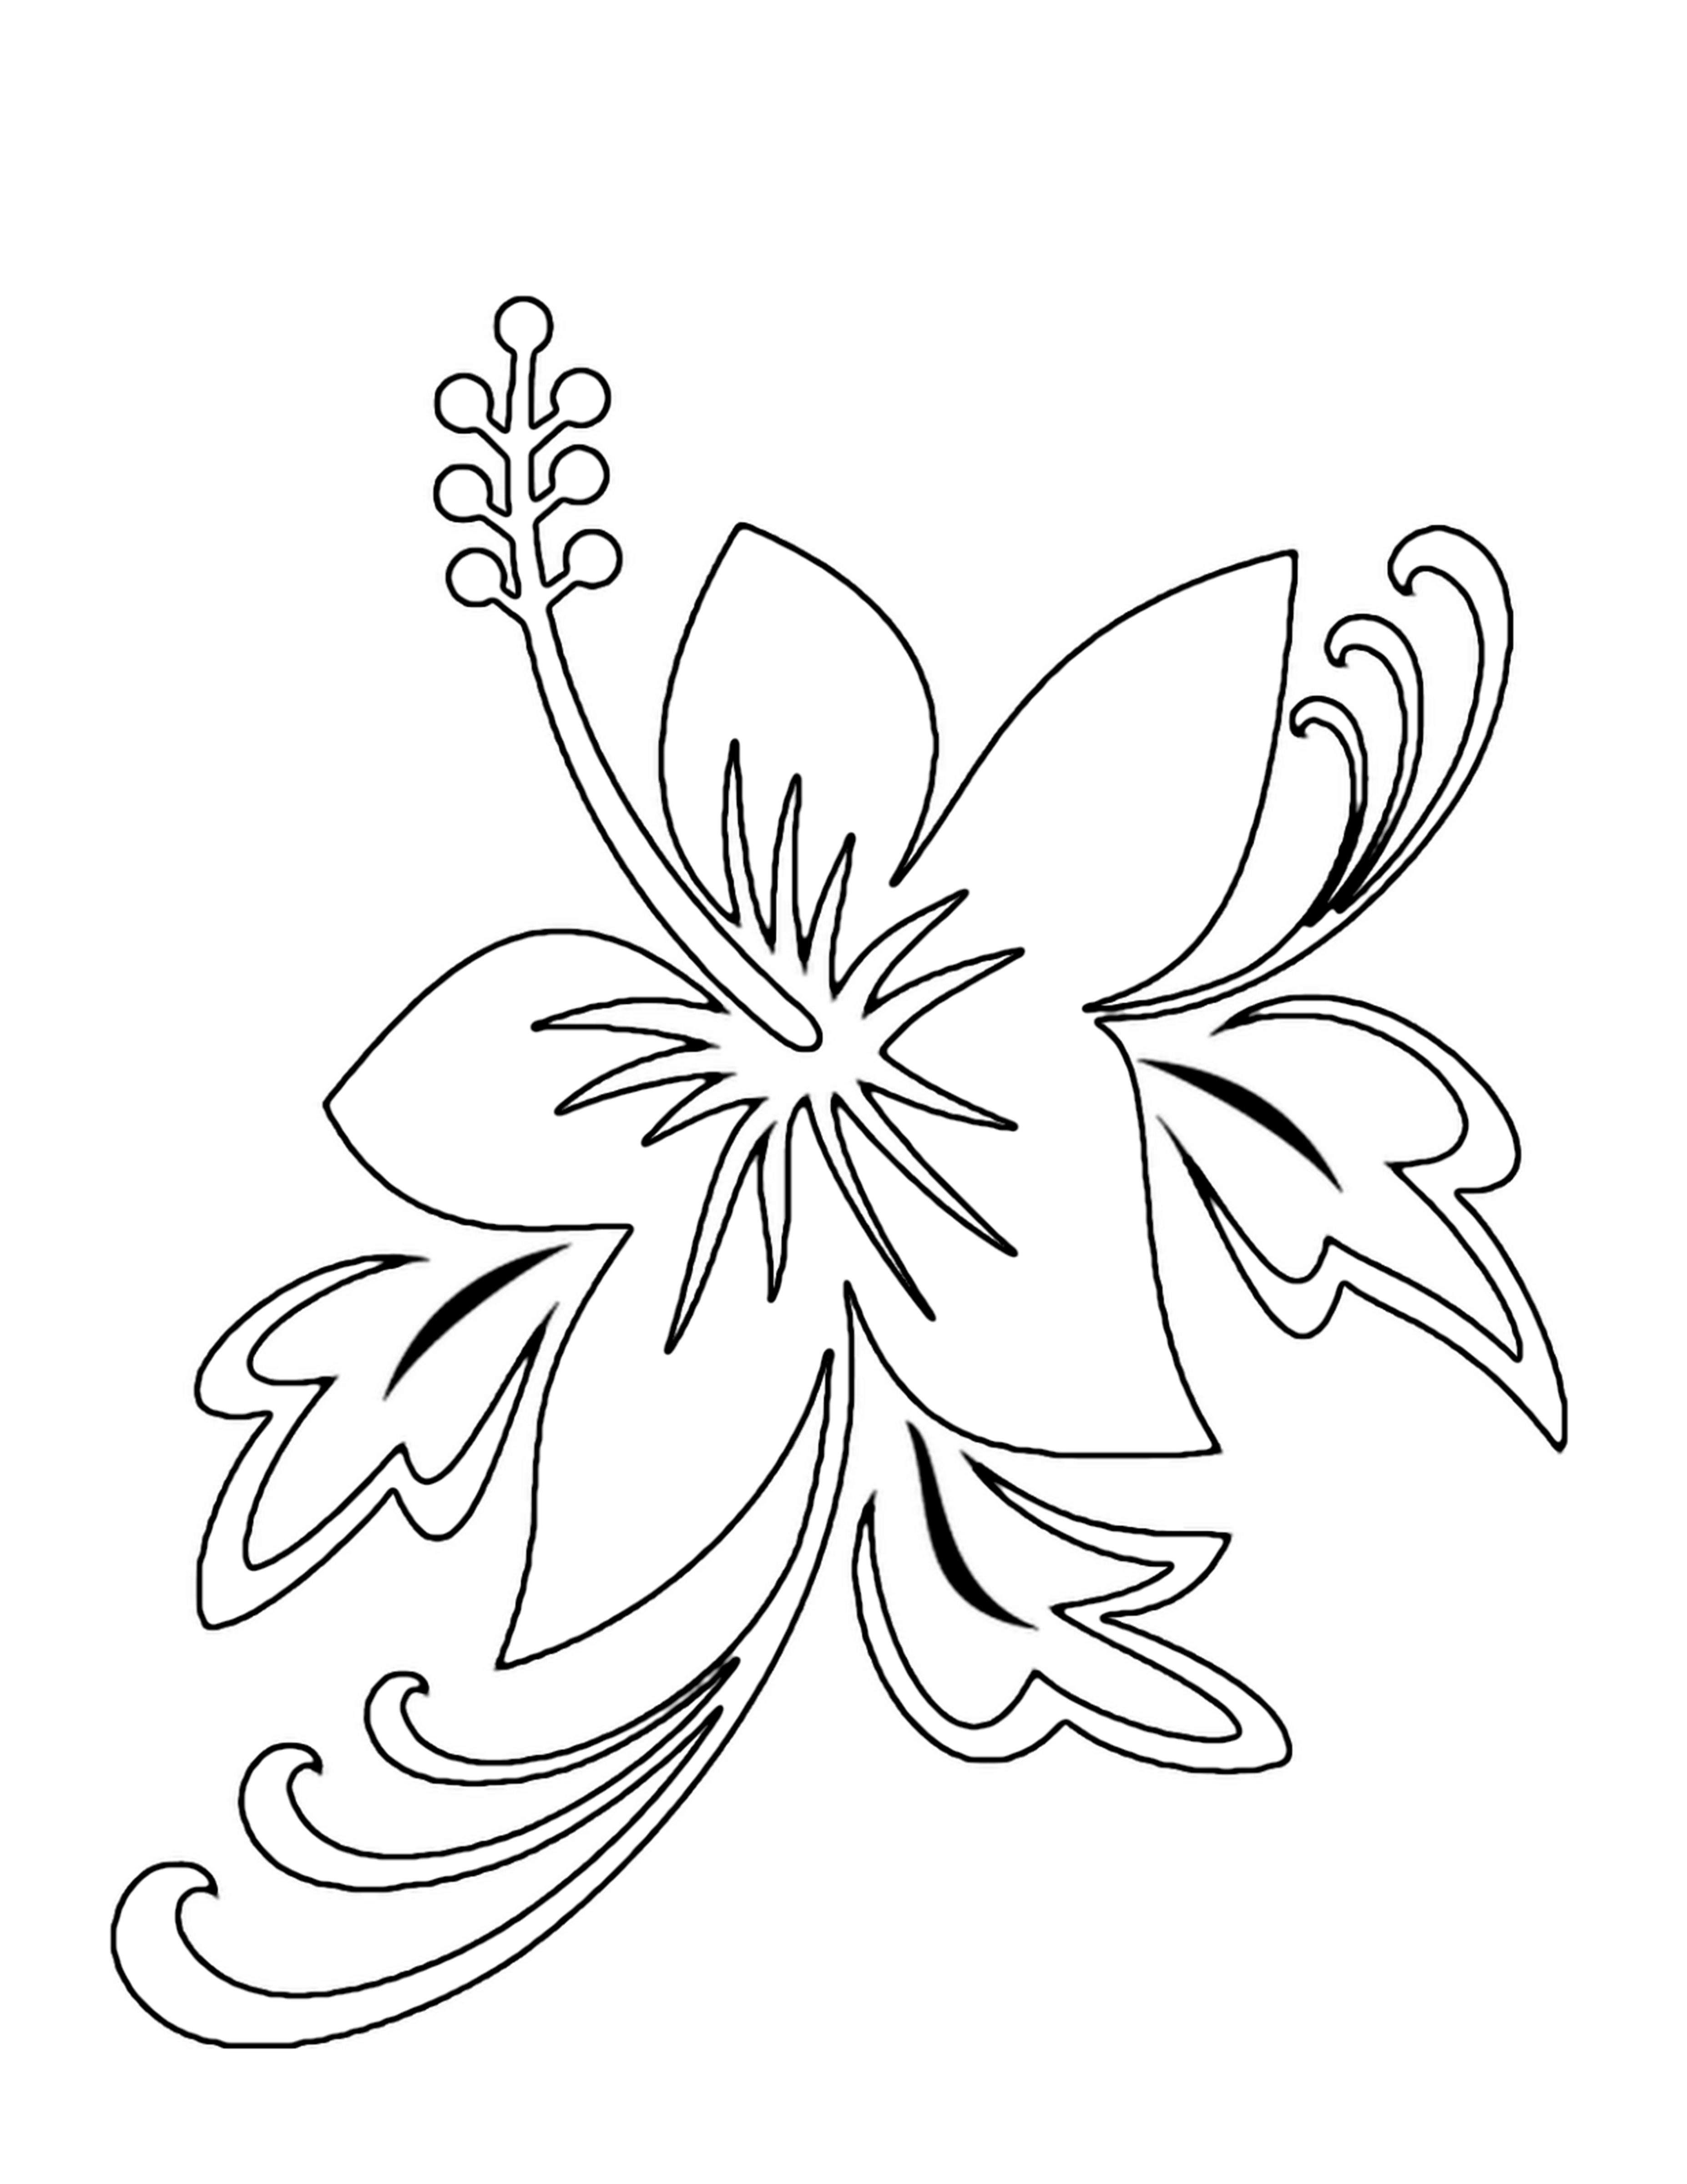 Free Printable Flower Images